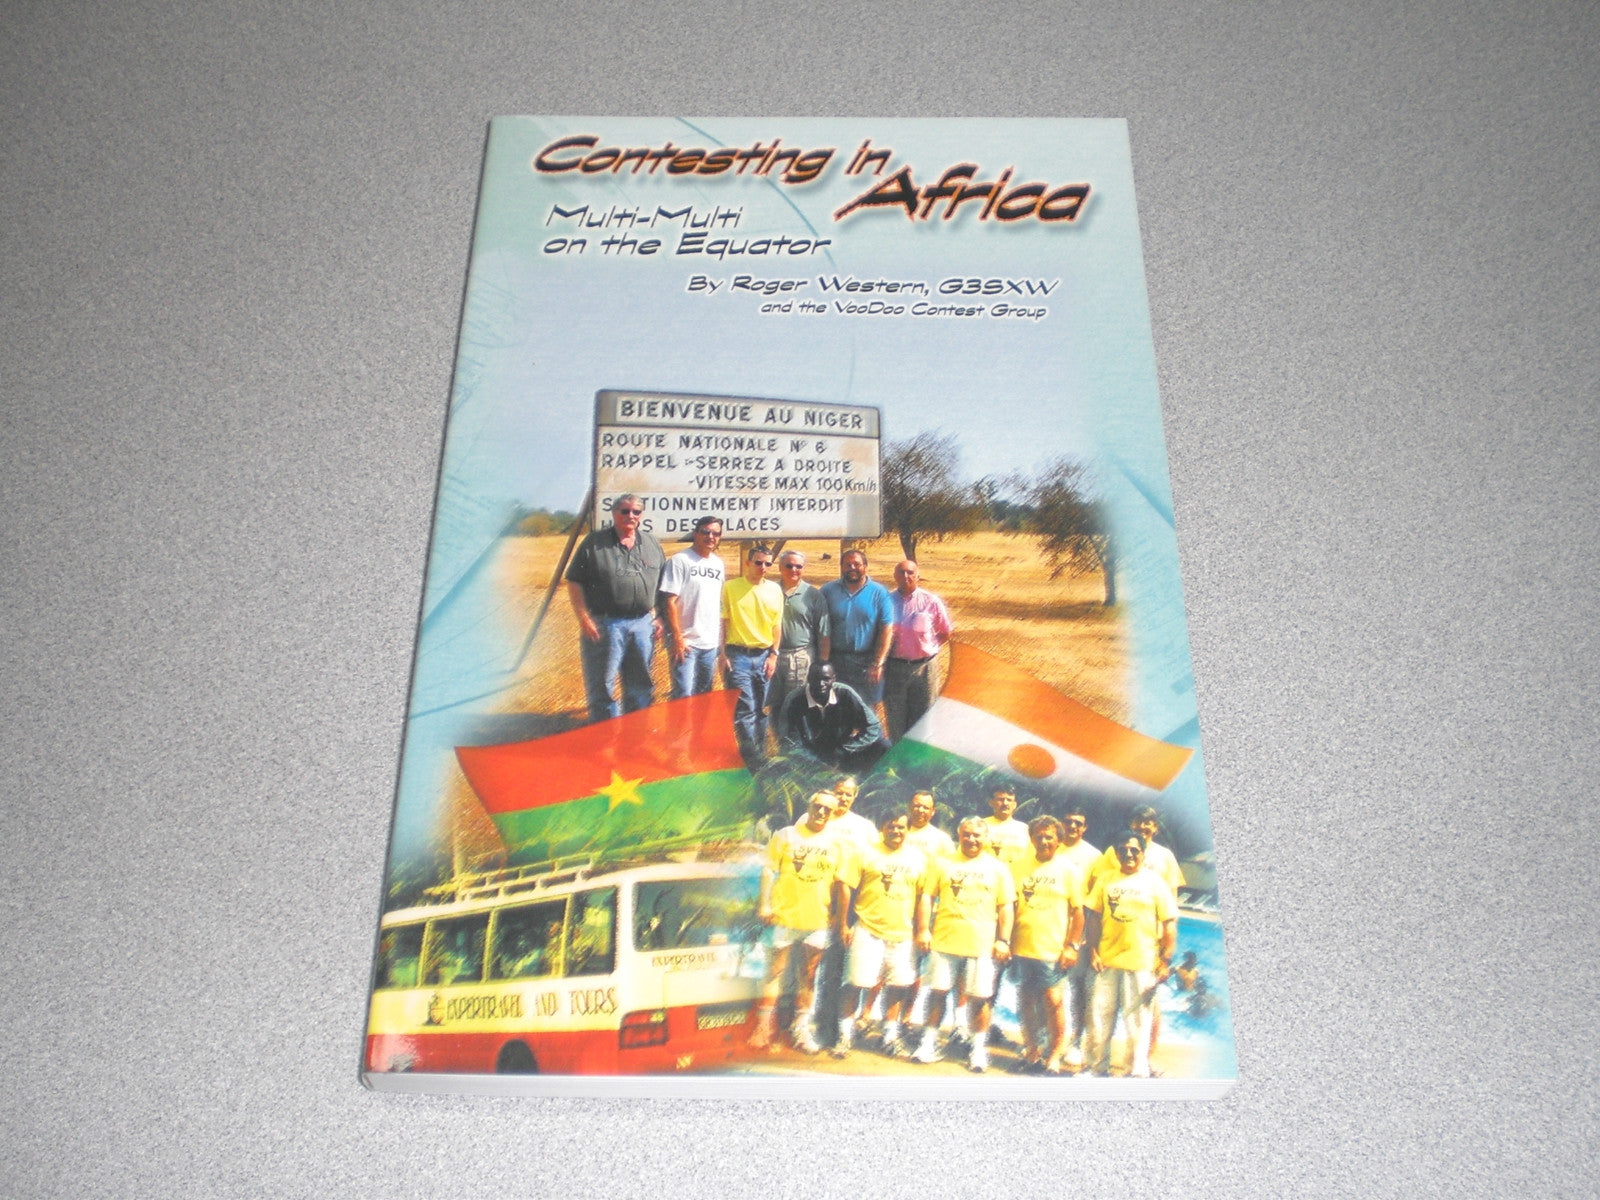 Ham Supply provides books on Amateur (Ham) Radio & DXing by W9KNI, G3SXW and the Voodoo Contest Group. Contesting In Africa.